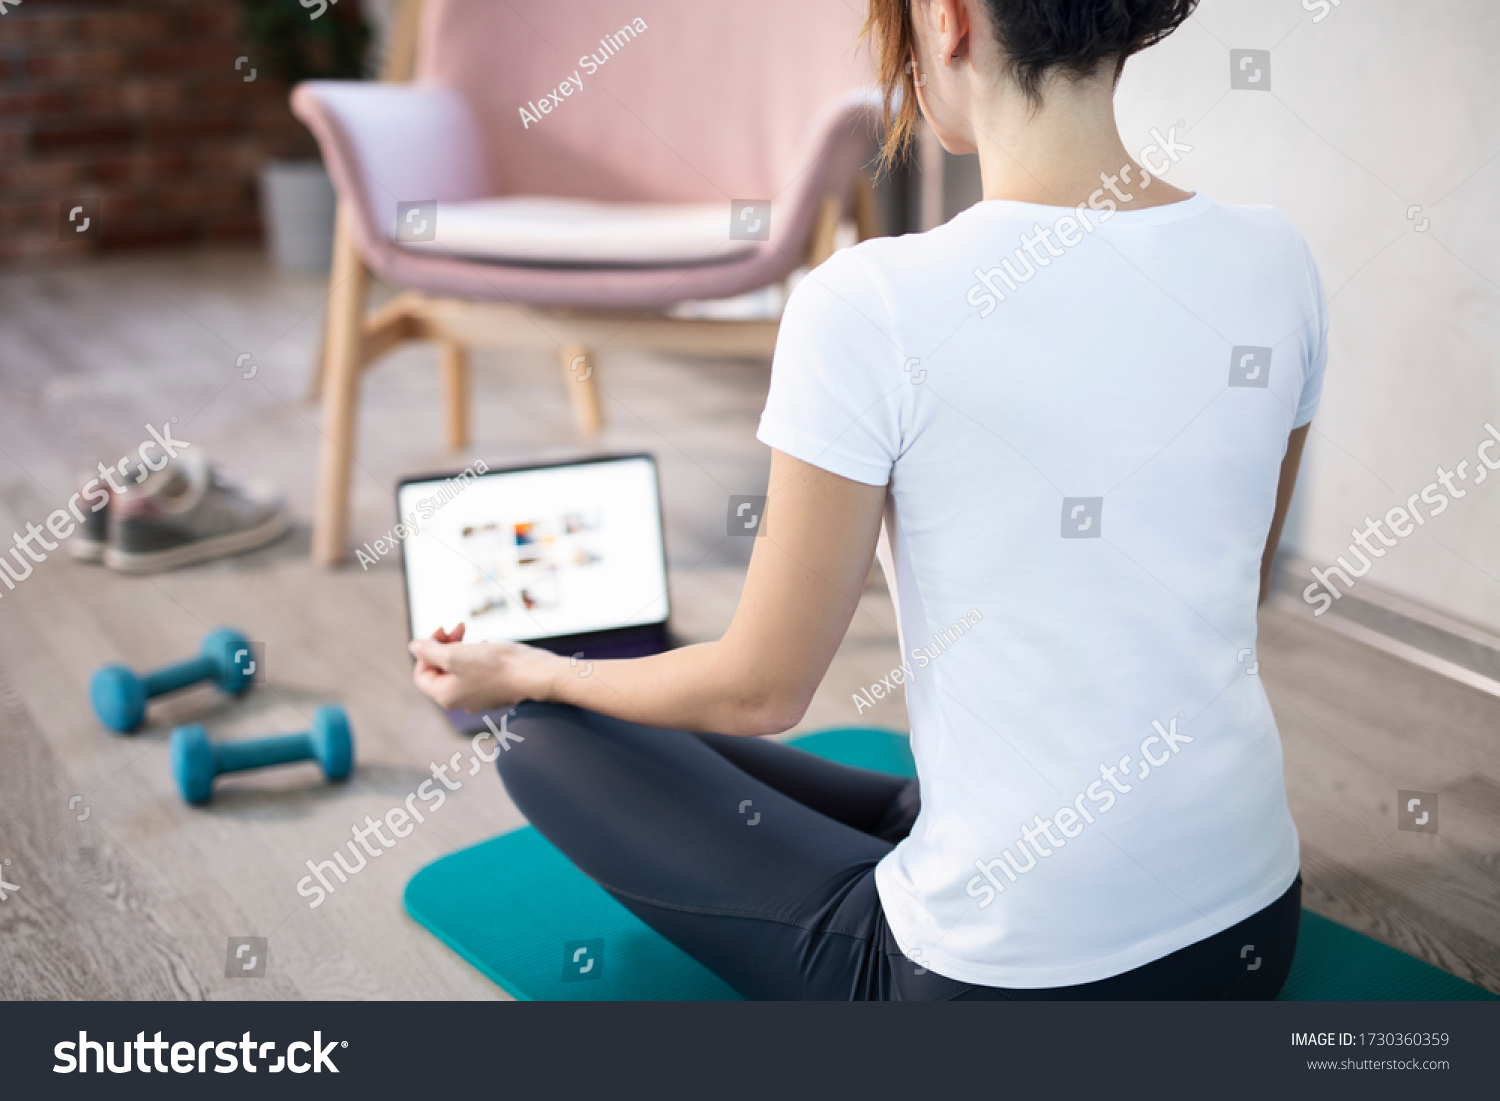 oung sporty slim woman has internet video online fitness training instructor modern laptop screen. Healthy lifestyle concept, online fitness and sport lessons. Stretching online. #1730360359